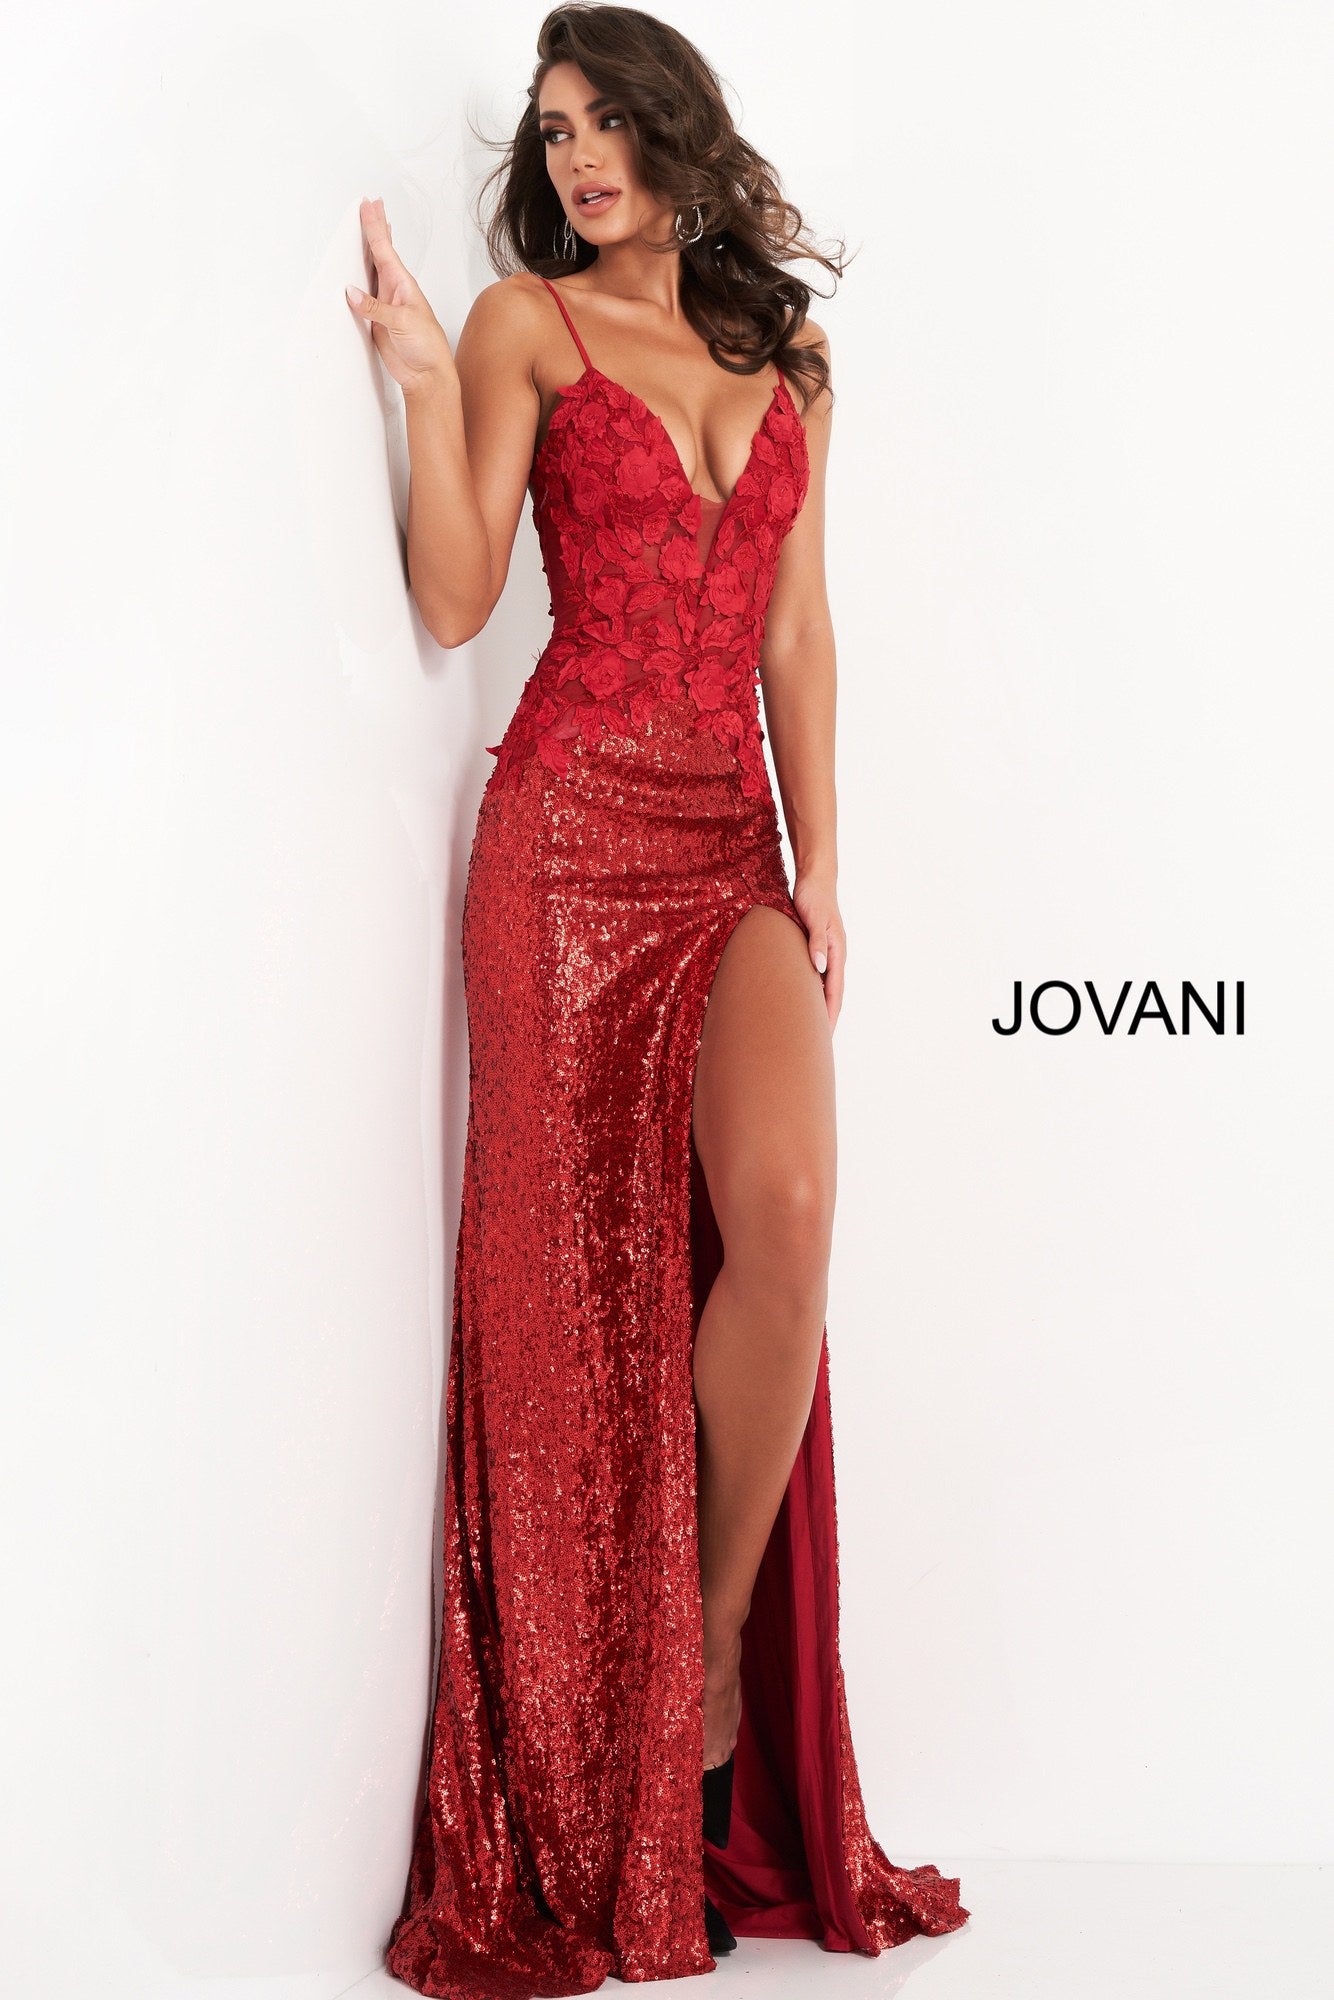 Jovani 06426 is a Long Fitted Stretch Petite Sequin Shimmering Formal Evening Gown. This Stunning Prom Dress Features a Deep V  Plunging Neckline and Detailed floral Appliques. spaghetti straps lead around to an open back. This Backless Pageant Gown throws a glamorous appeal with its lush sweeping sequin train! Sexy thigh Slit in skirt. Available Sizes: 00,0,2,4,6,8,10,12,14,16,18,20,22,24  Available Colors: Black, Cream, Red, Light Blue